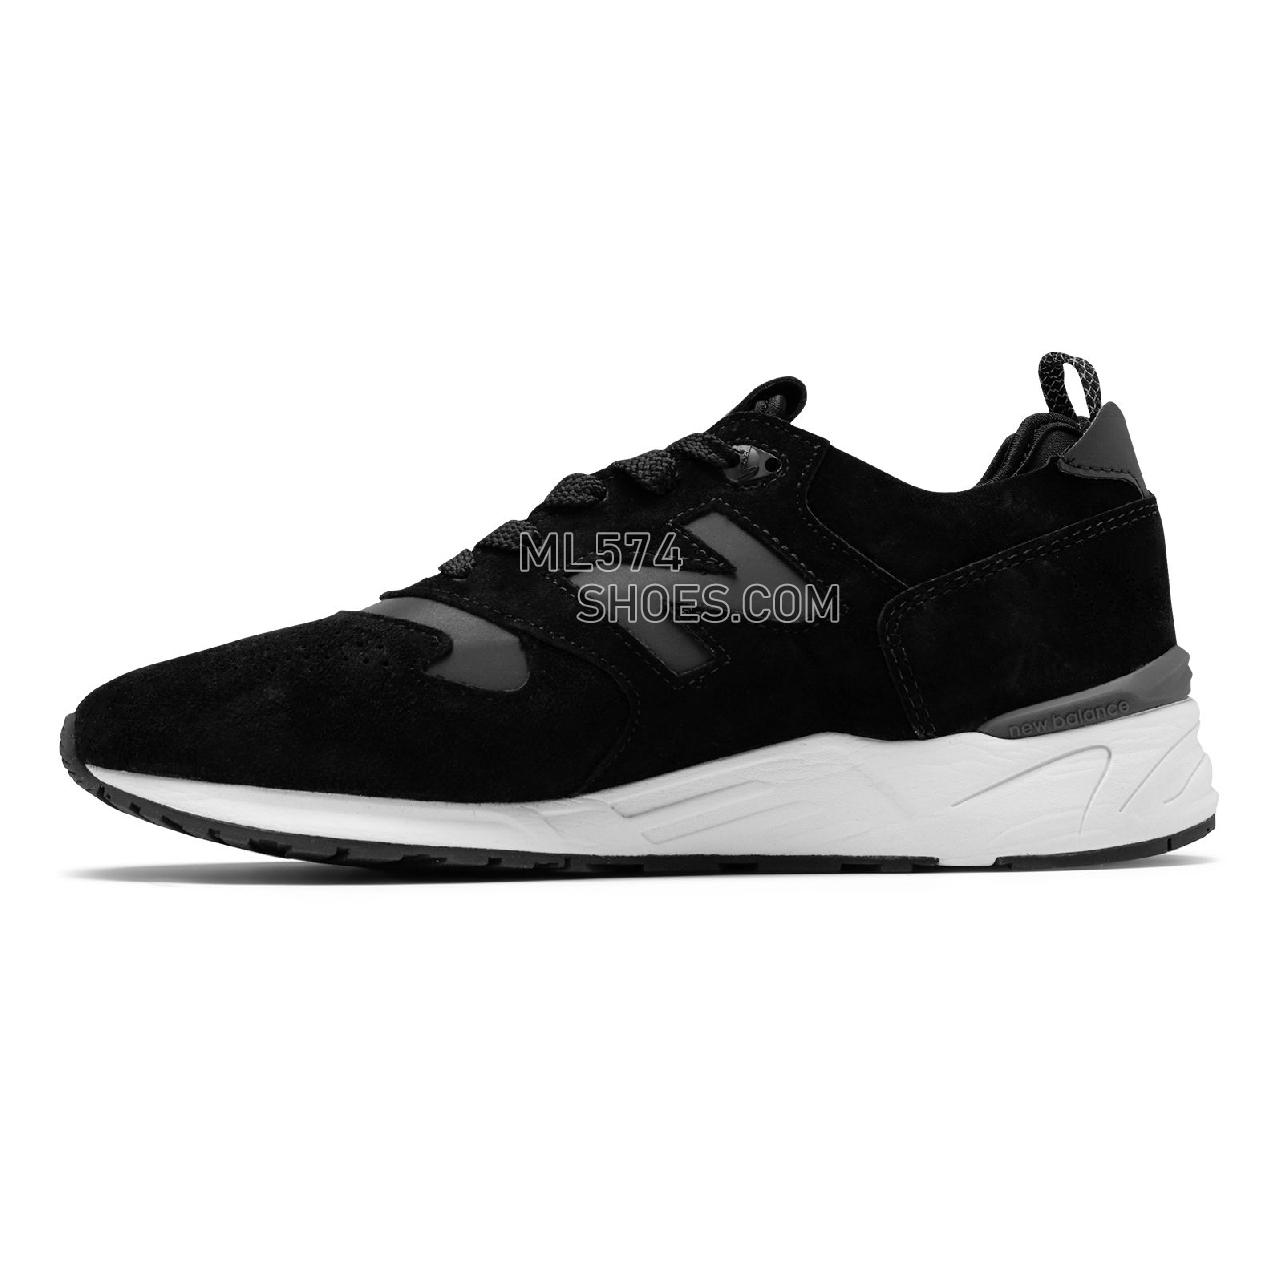 New Balance 999 Made in US - Men's 999 - Classic Black with White - M999RTF